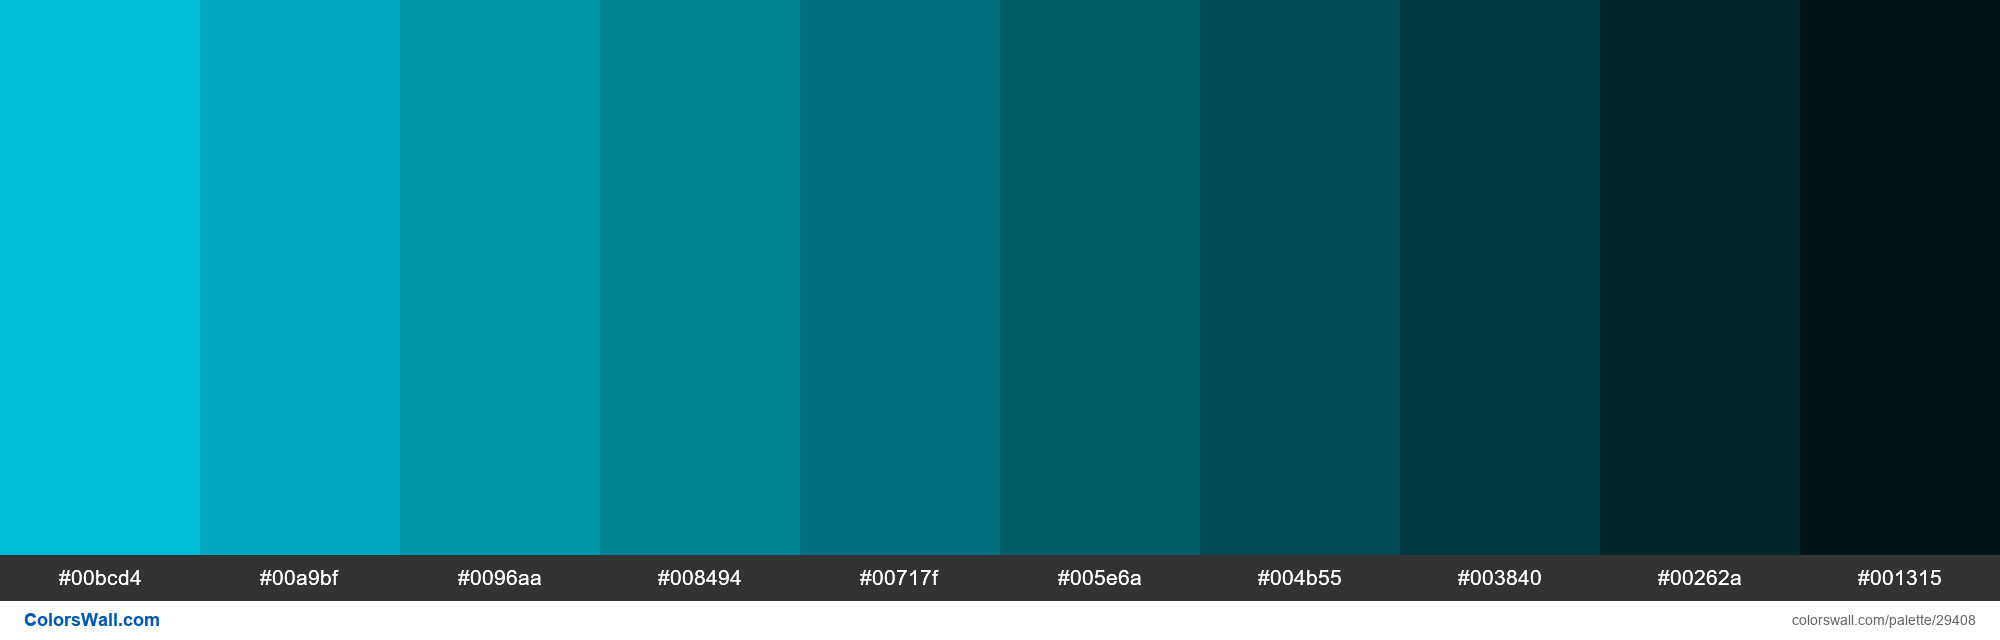 https://colorswall.com/images/palettes/shades-of-material-design-cyan-color-00bcd4-hex-29408-colorswall.png